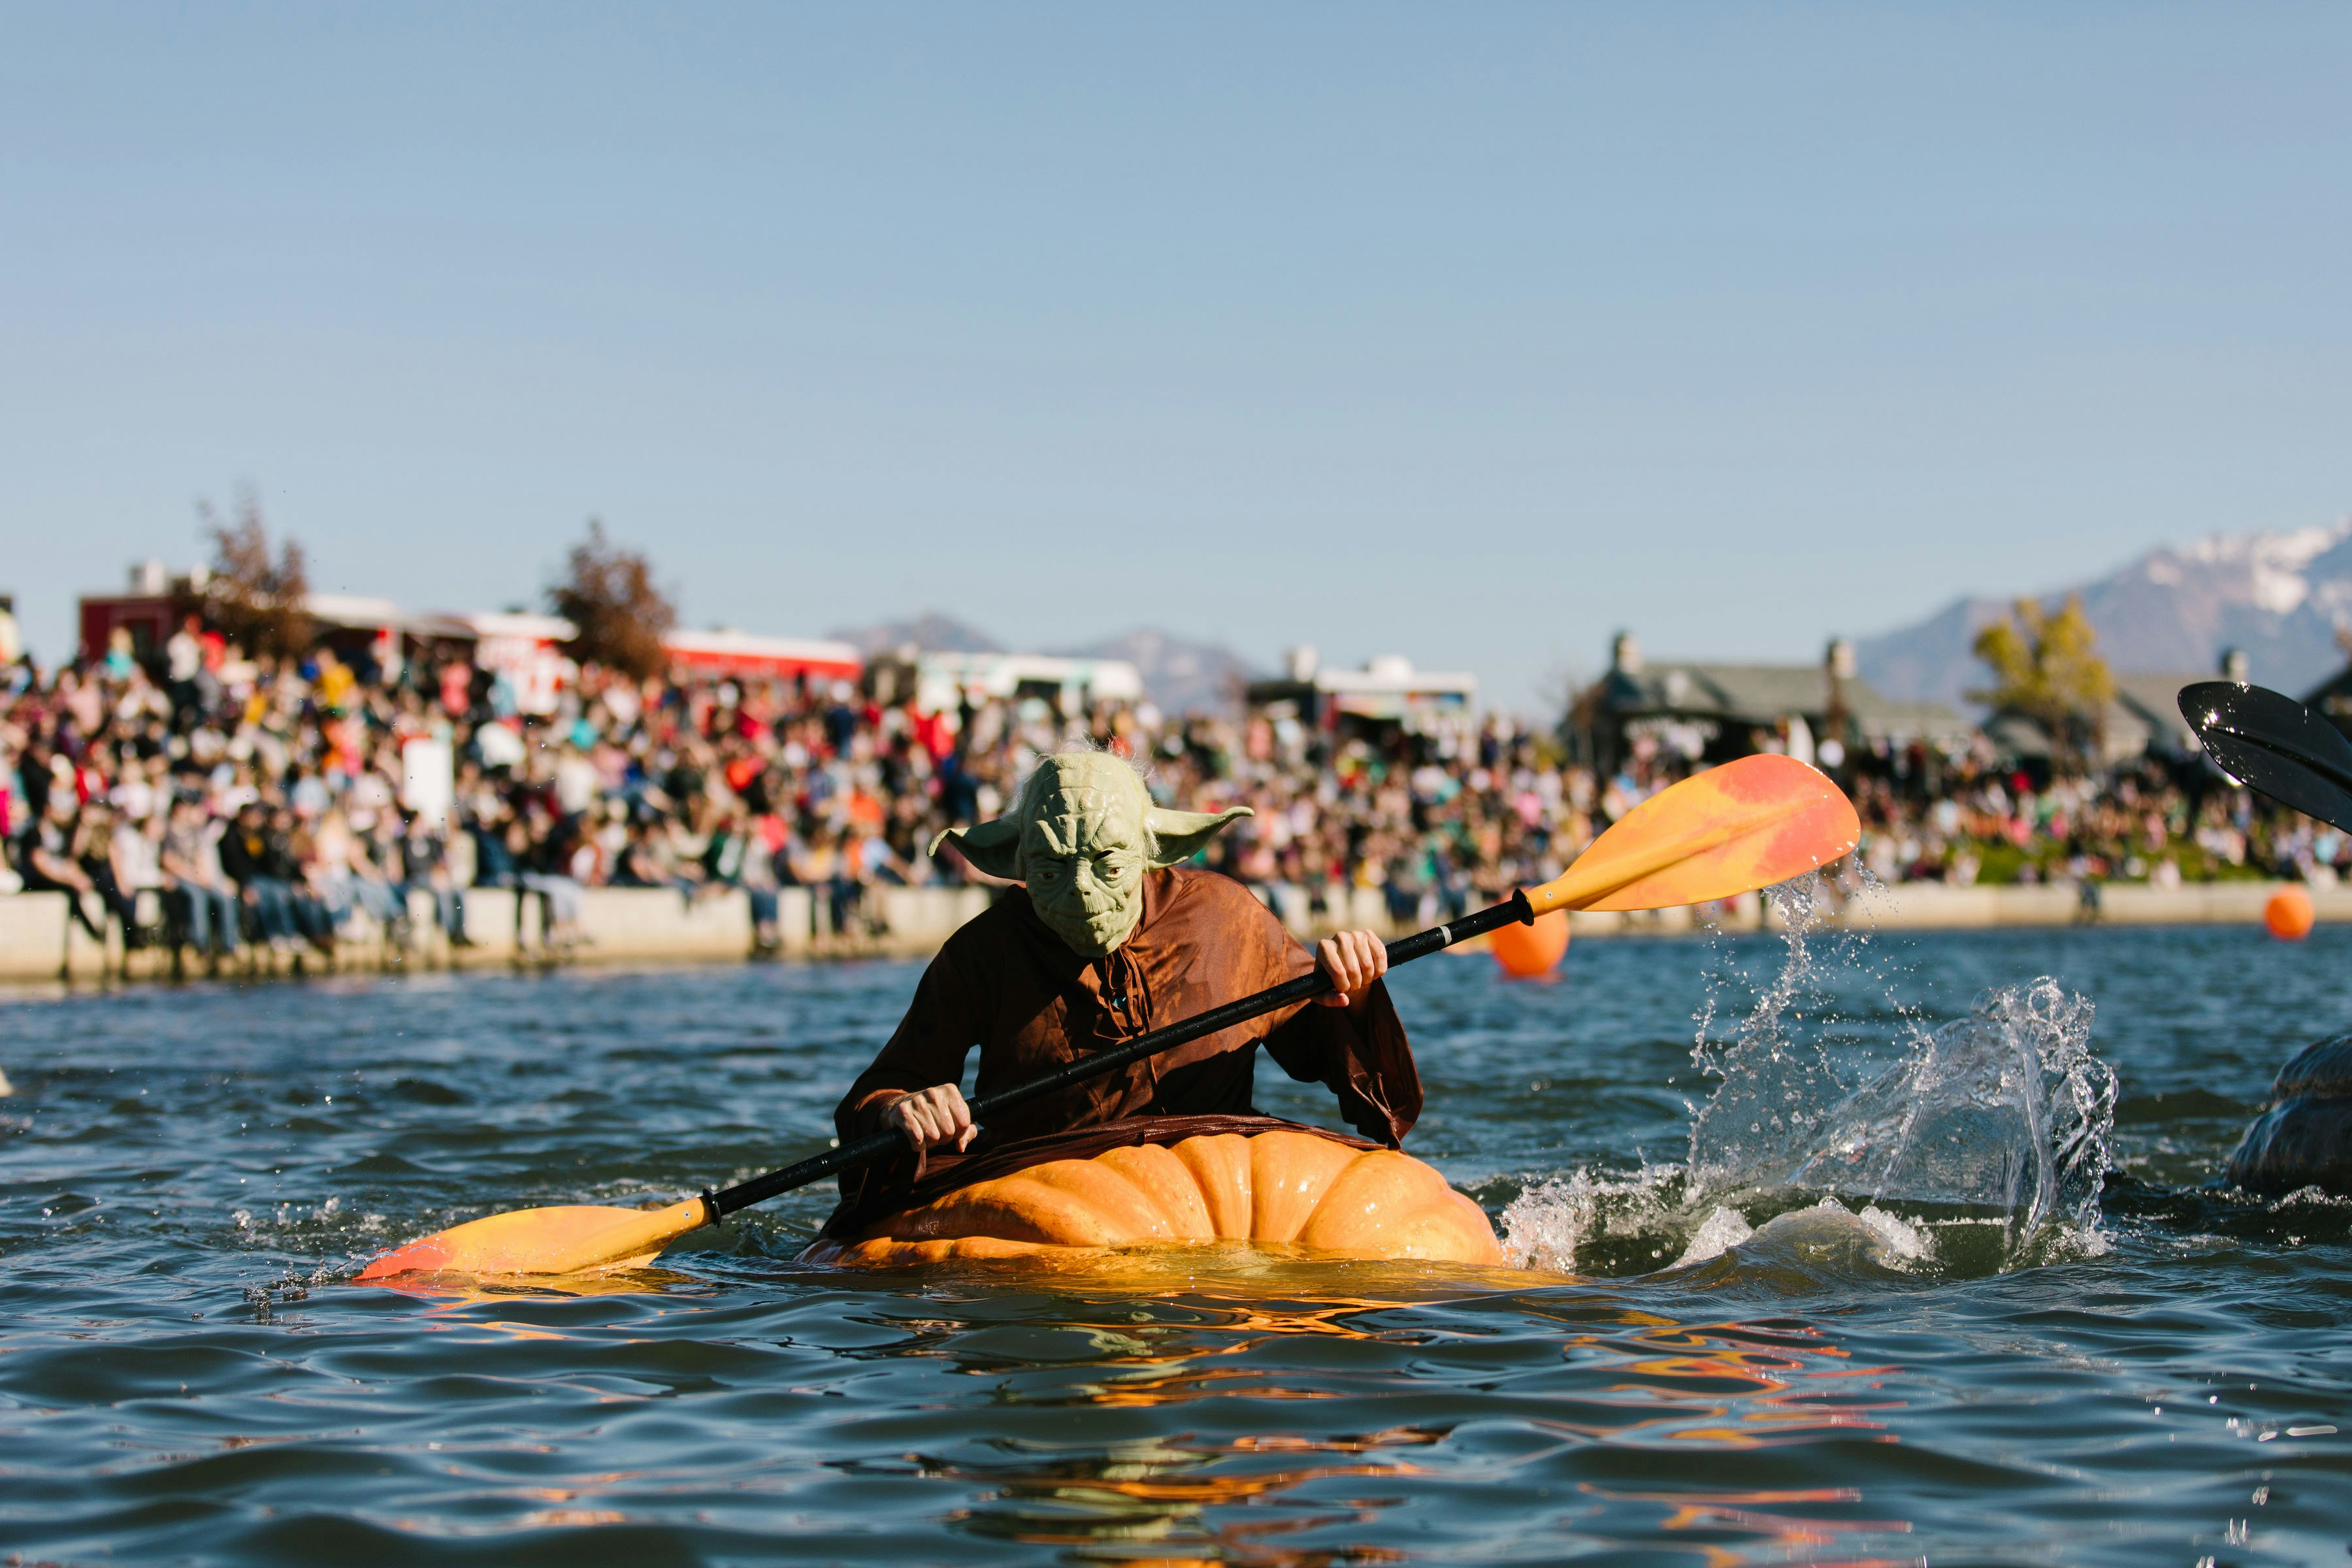 A person dressed as Star Wars character Yoda, paddles through the water in a large pumpkin